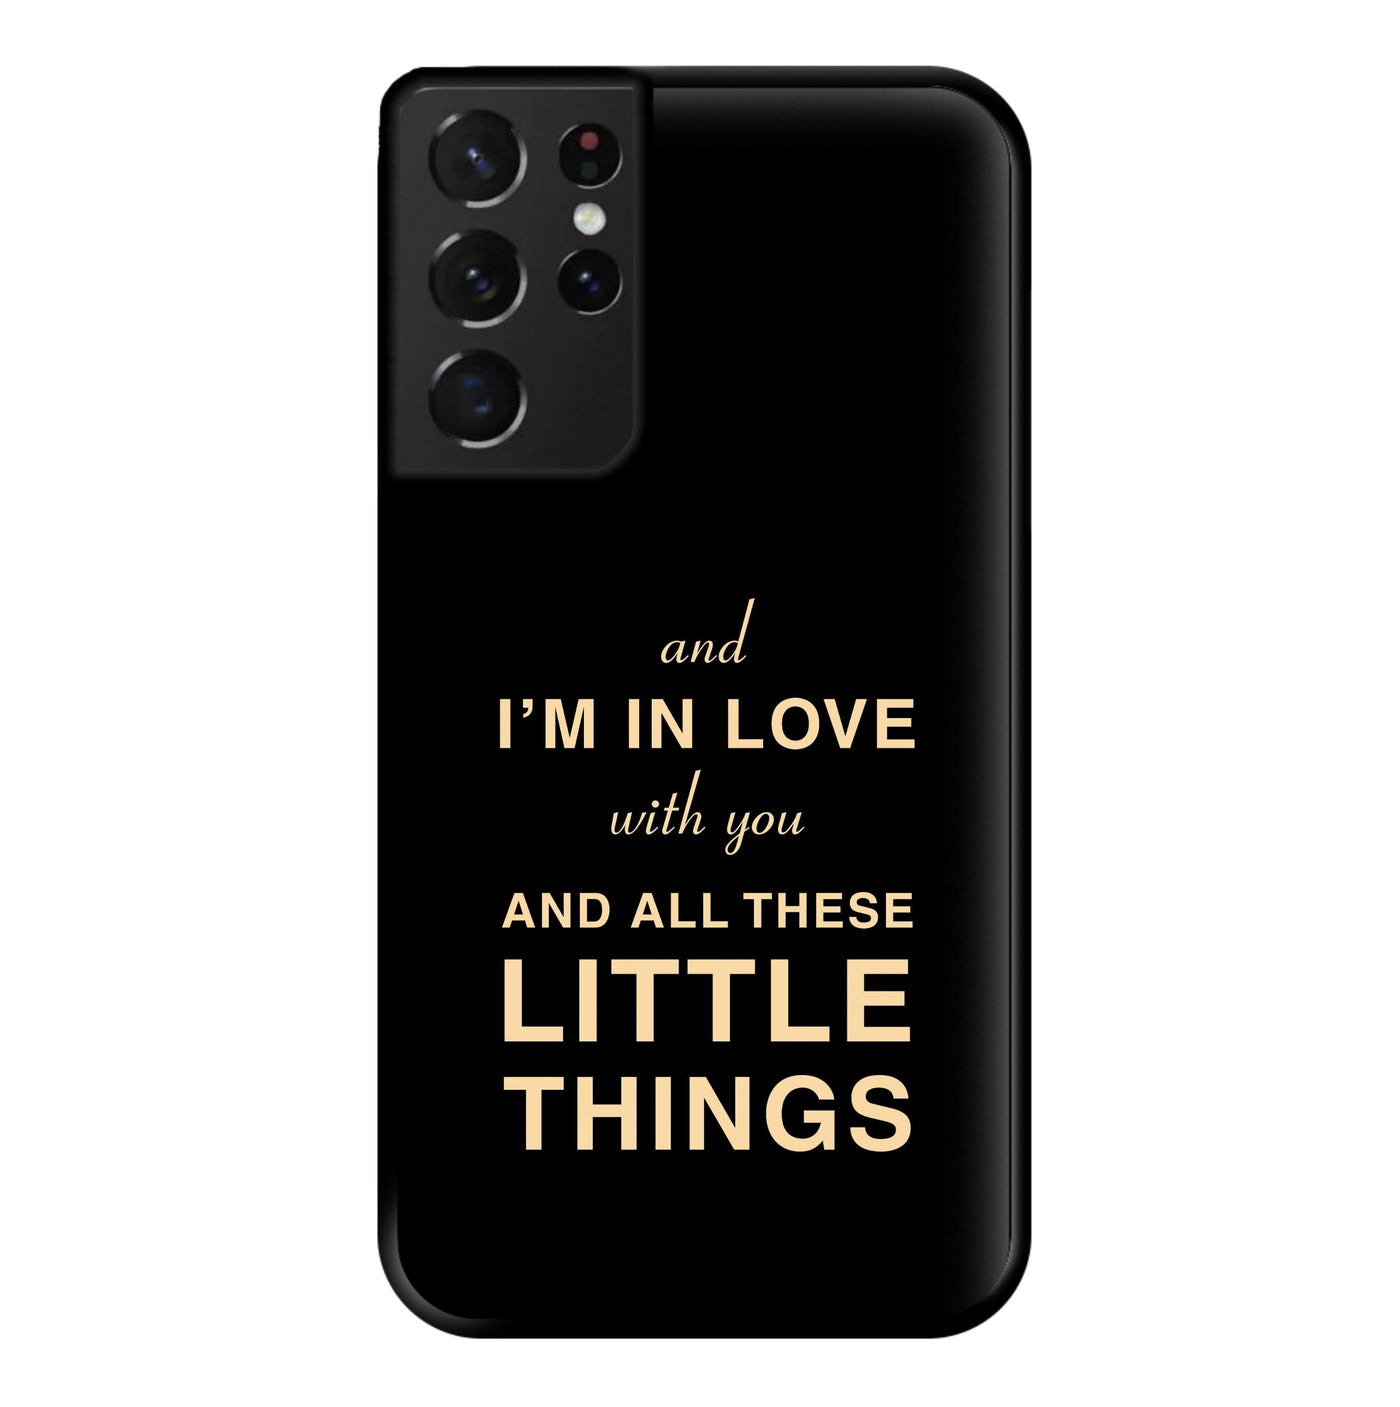 Little Things - One Direction Phone Case